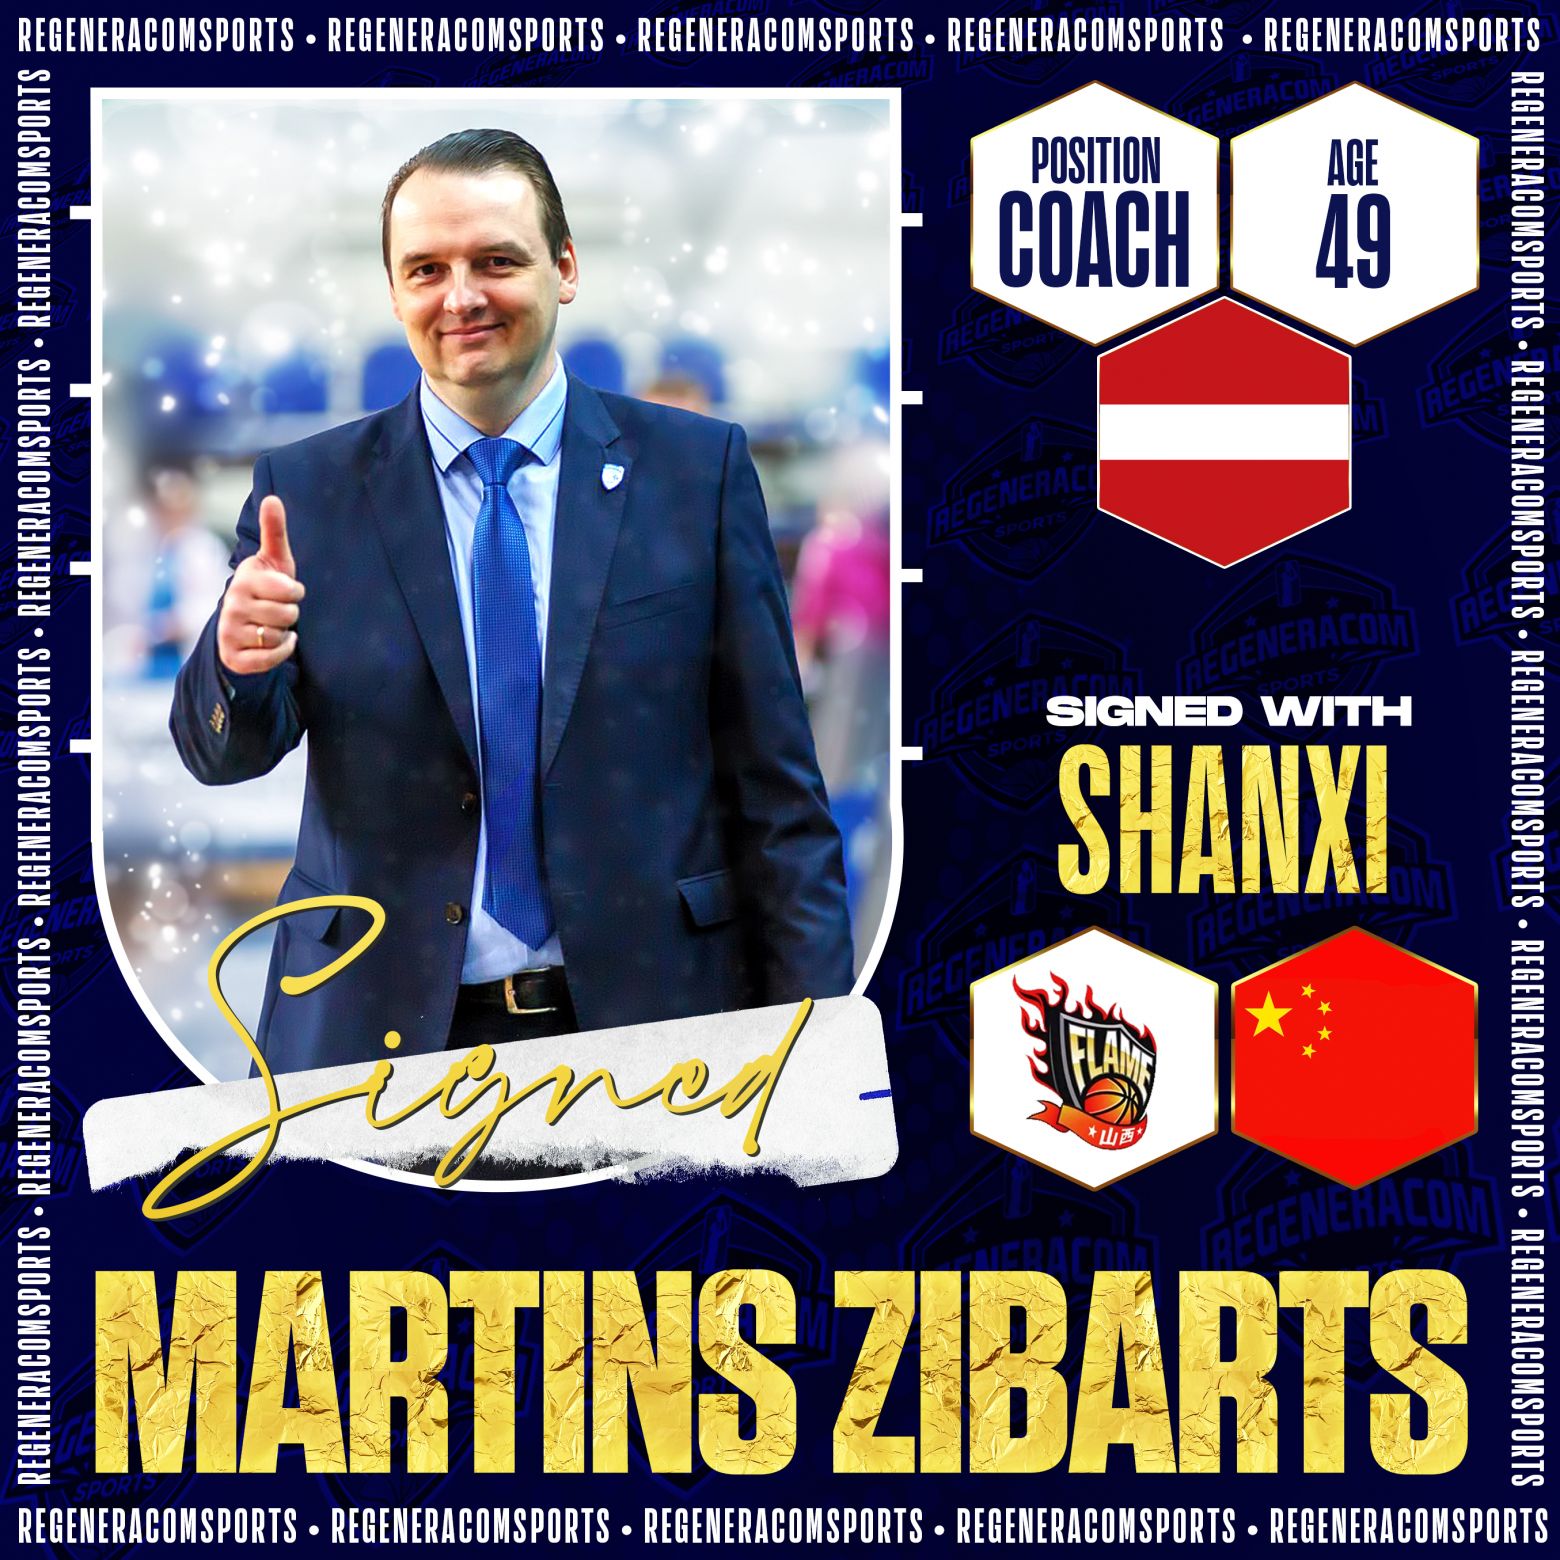 MARTINS ZIBARTS has signed in China as Shanxi´s head coach for the 2023/24 season